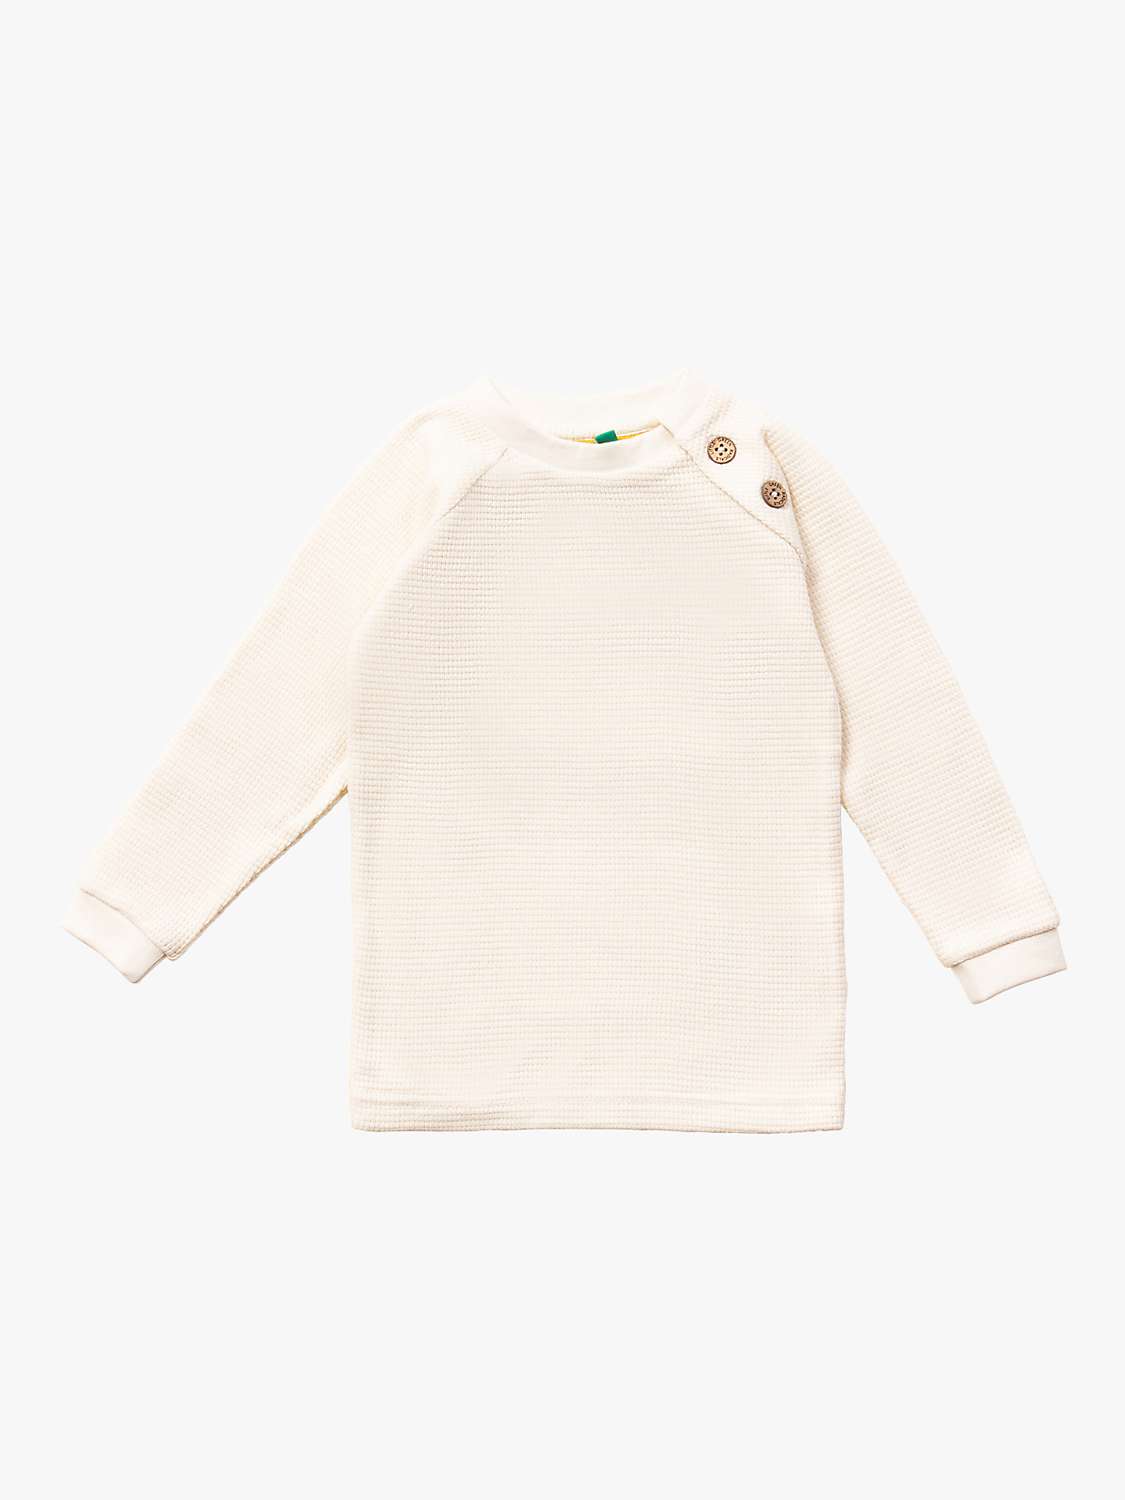 Buy Little Green Radicals Baby Organic Cotton Waffle Top Online at johnlewis.com